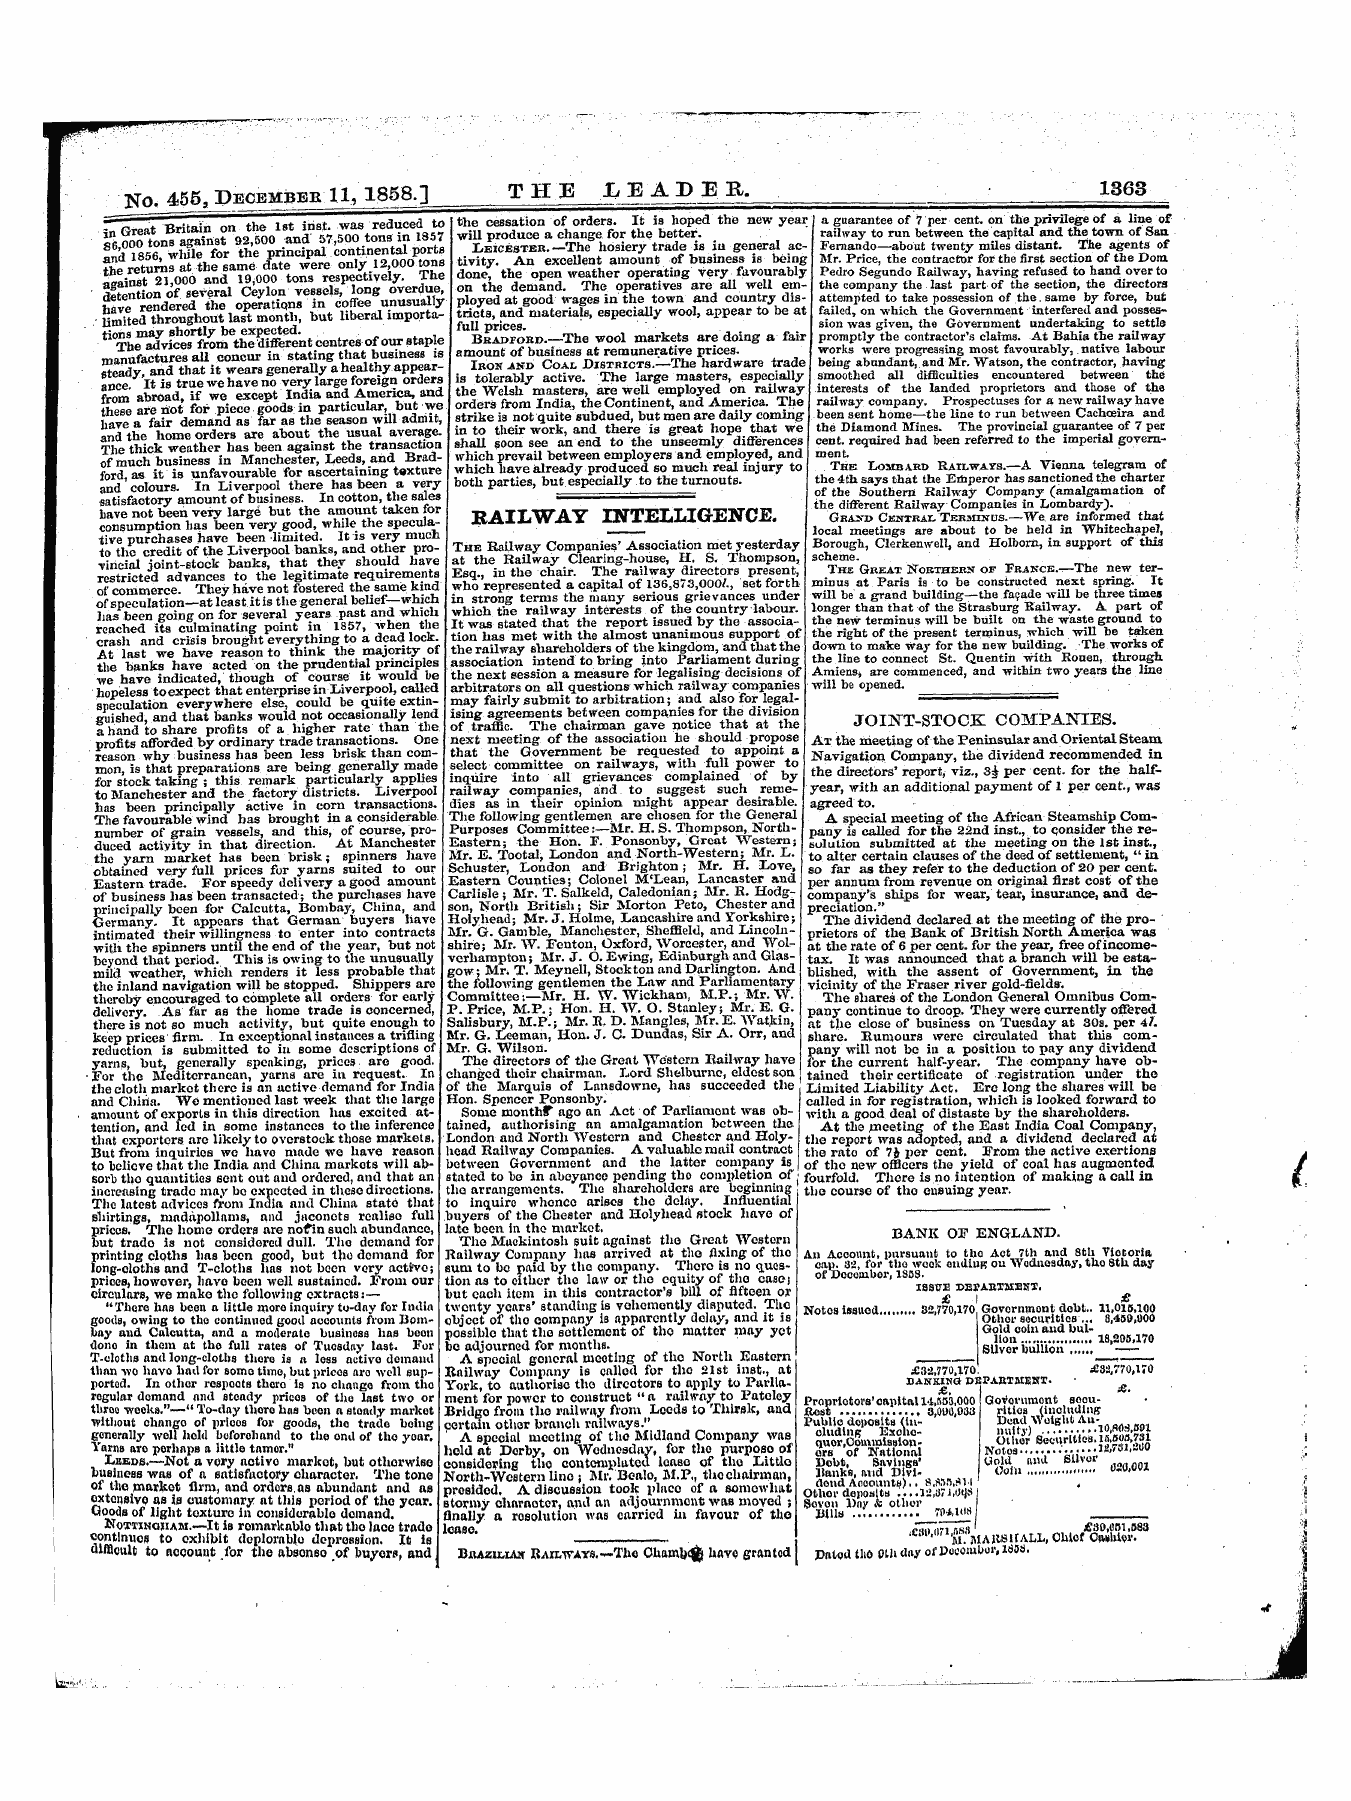 Leader (1850-1860): jS F Y, 1st edition: 27